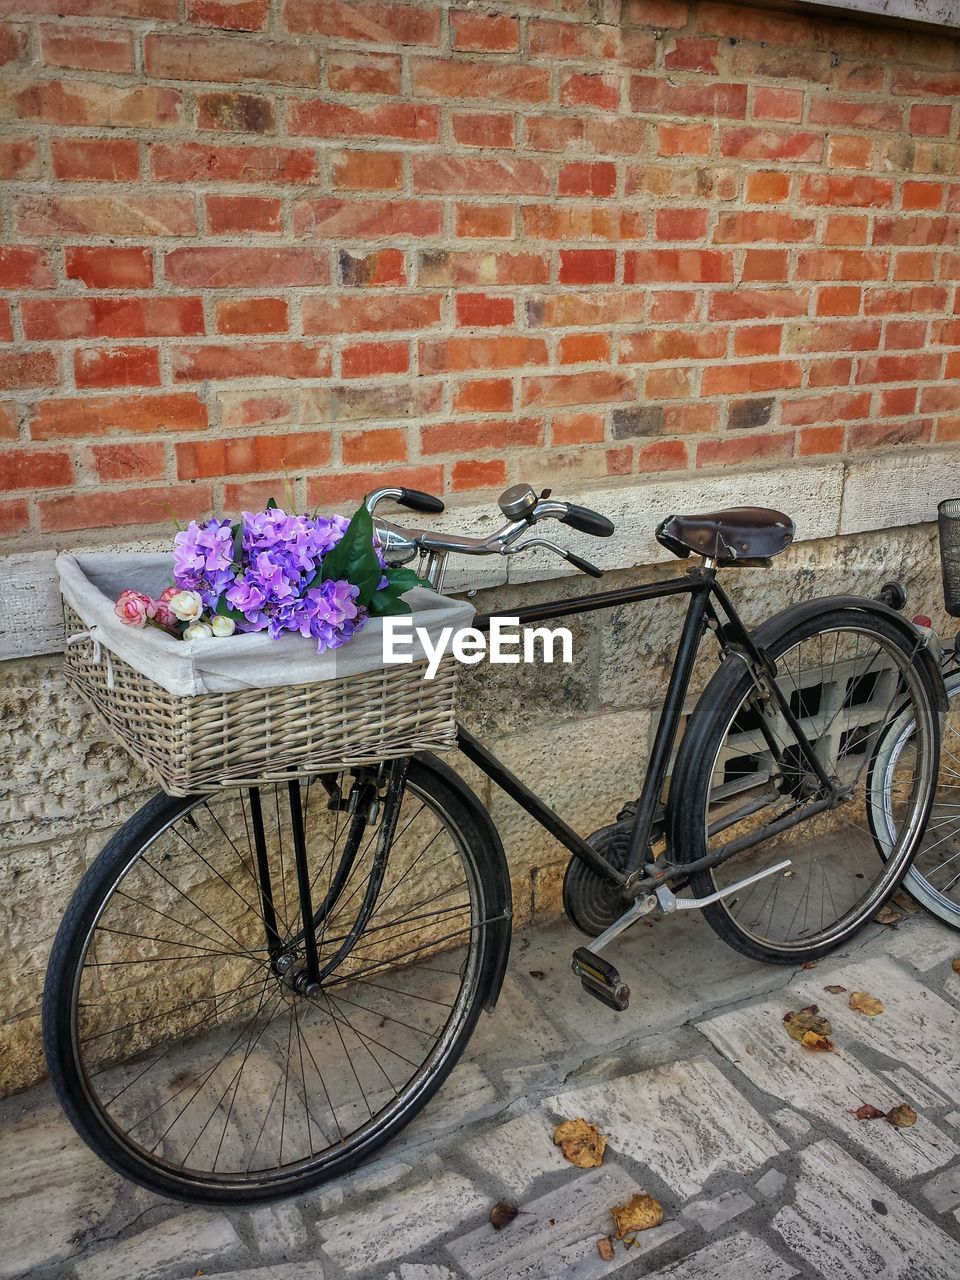 Bicycle with flowers in basket against brick wall